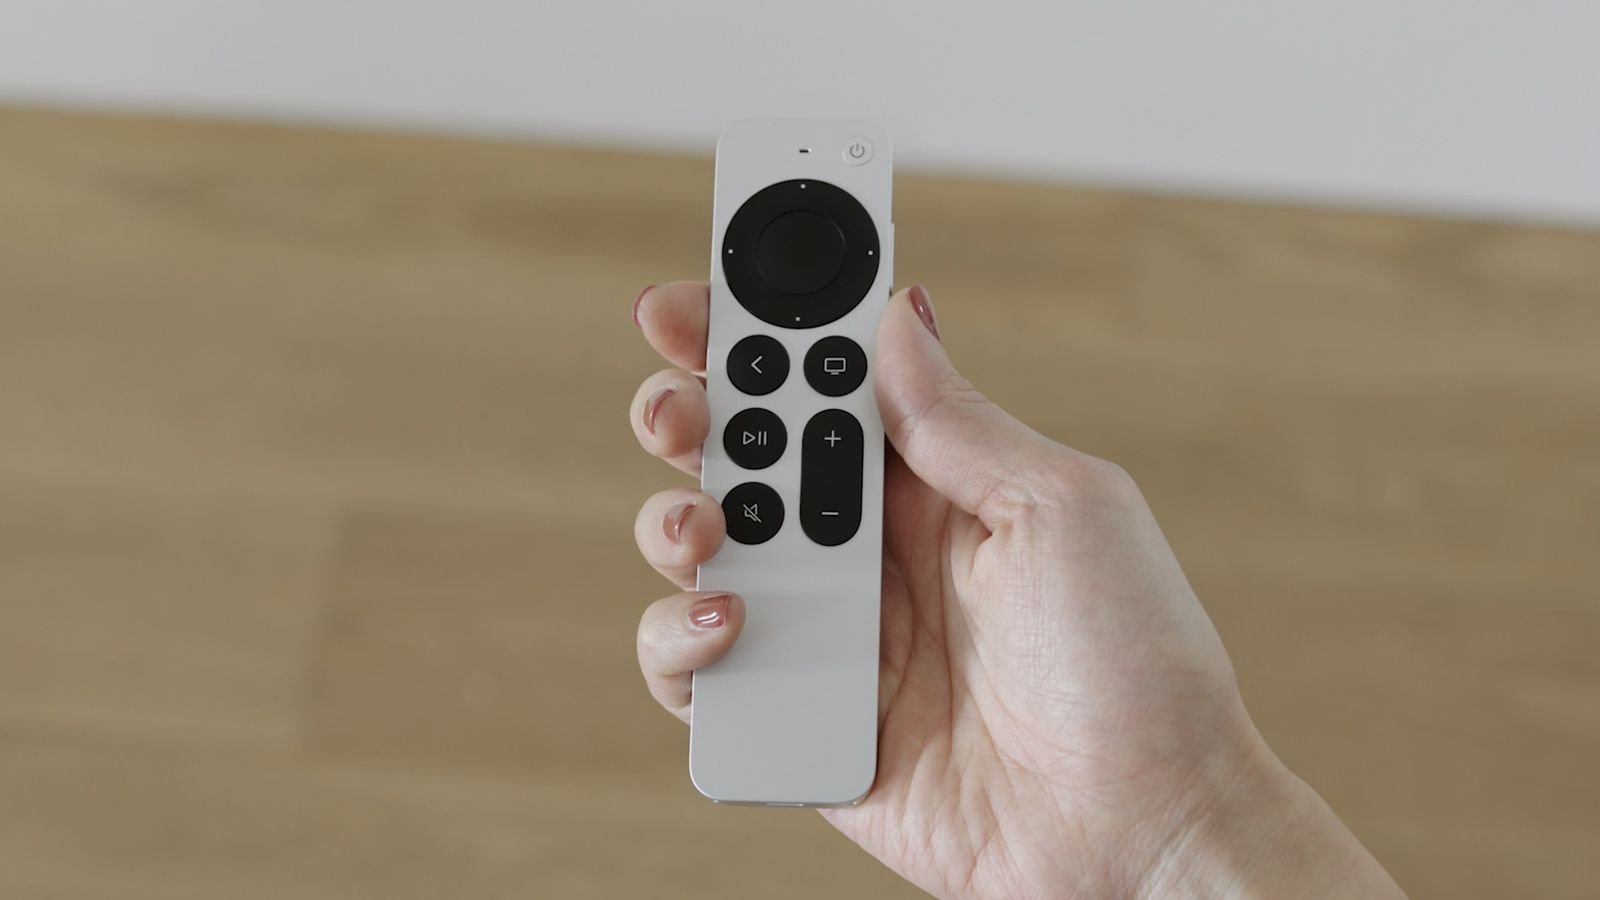 Apple TV 4K 2021 boasts a new Siri remote and A12 Bionic for HDR & high framerates